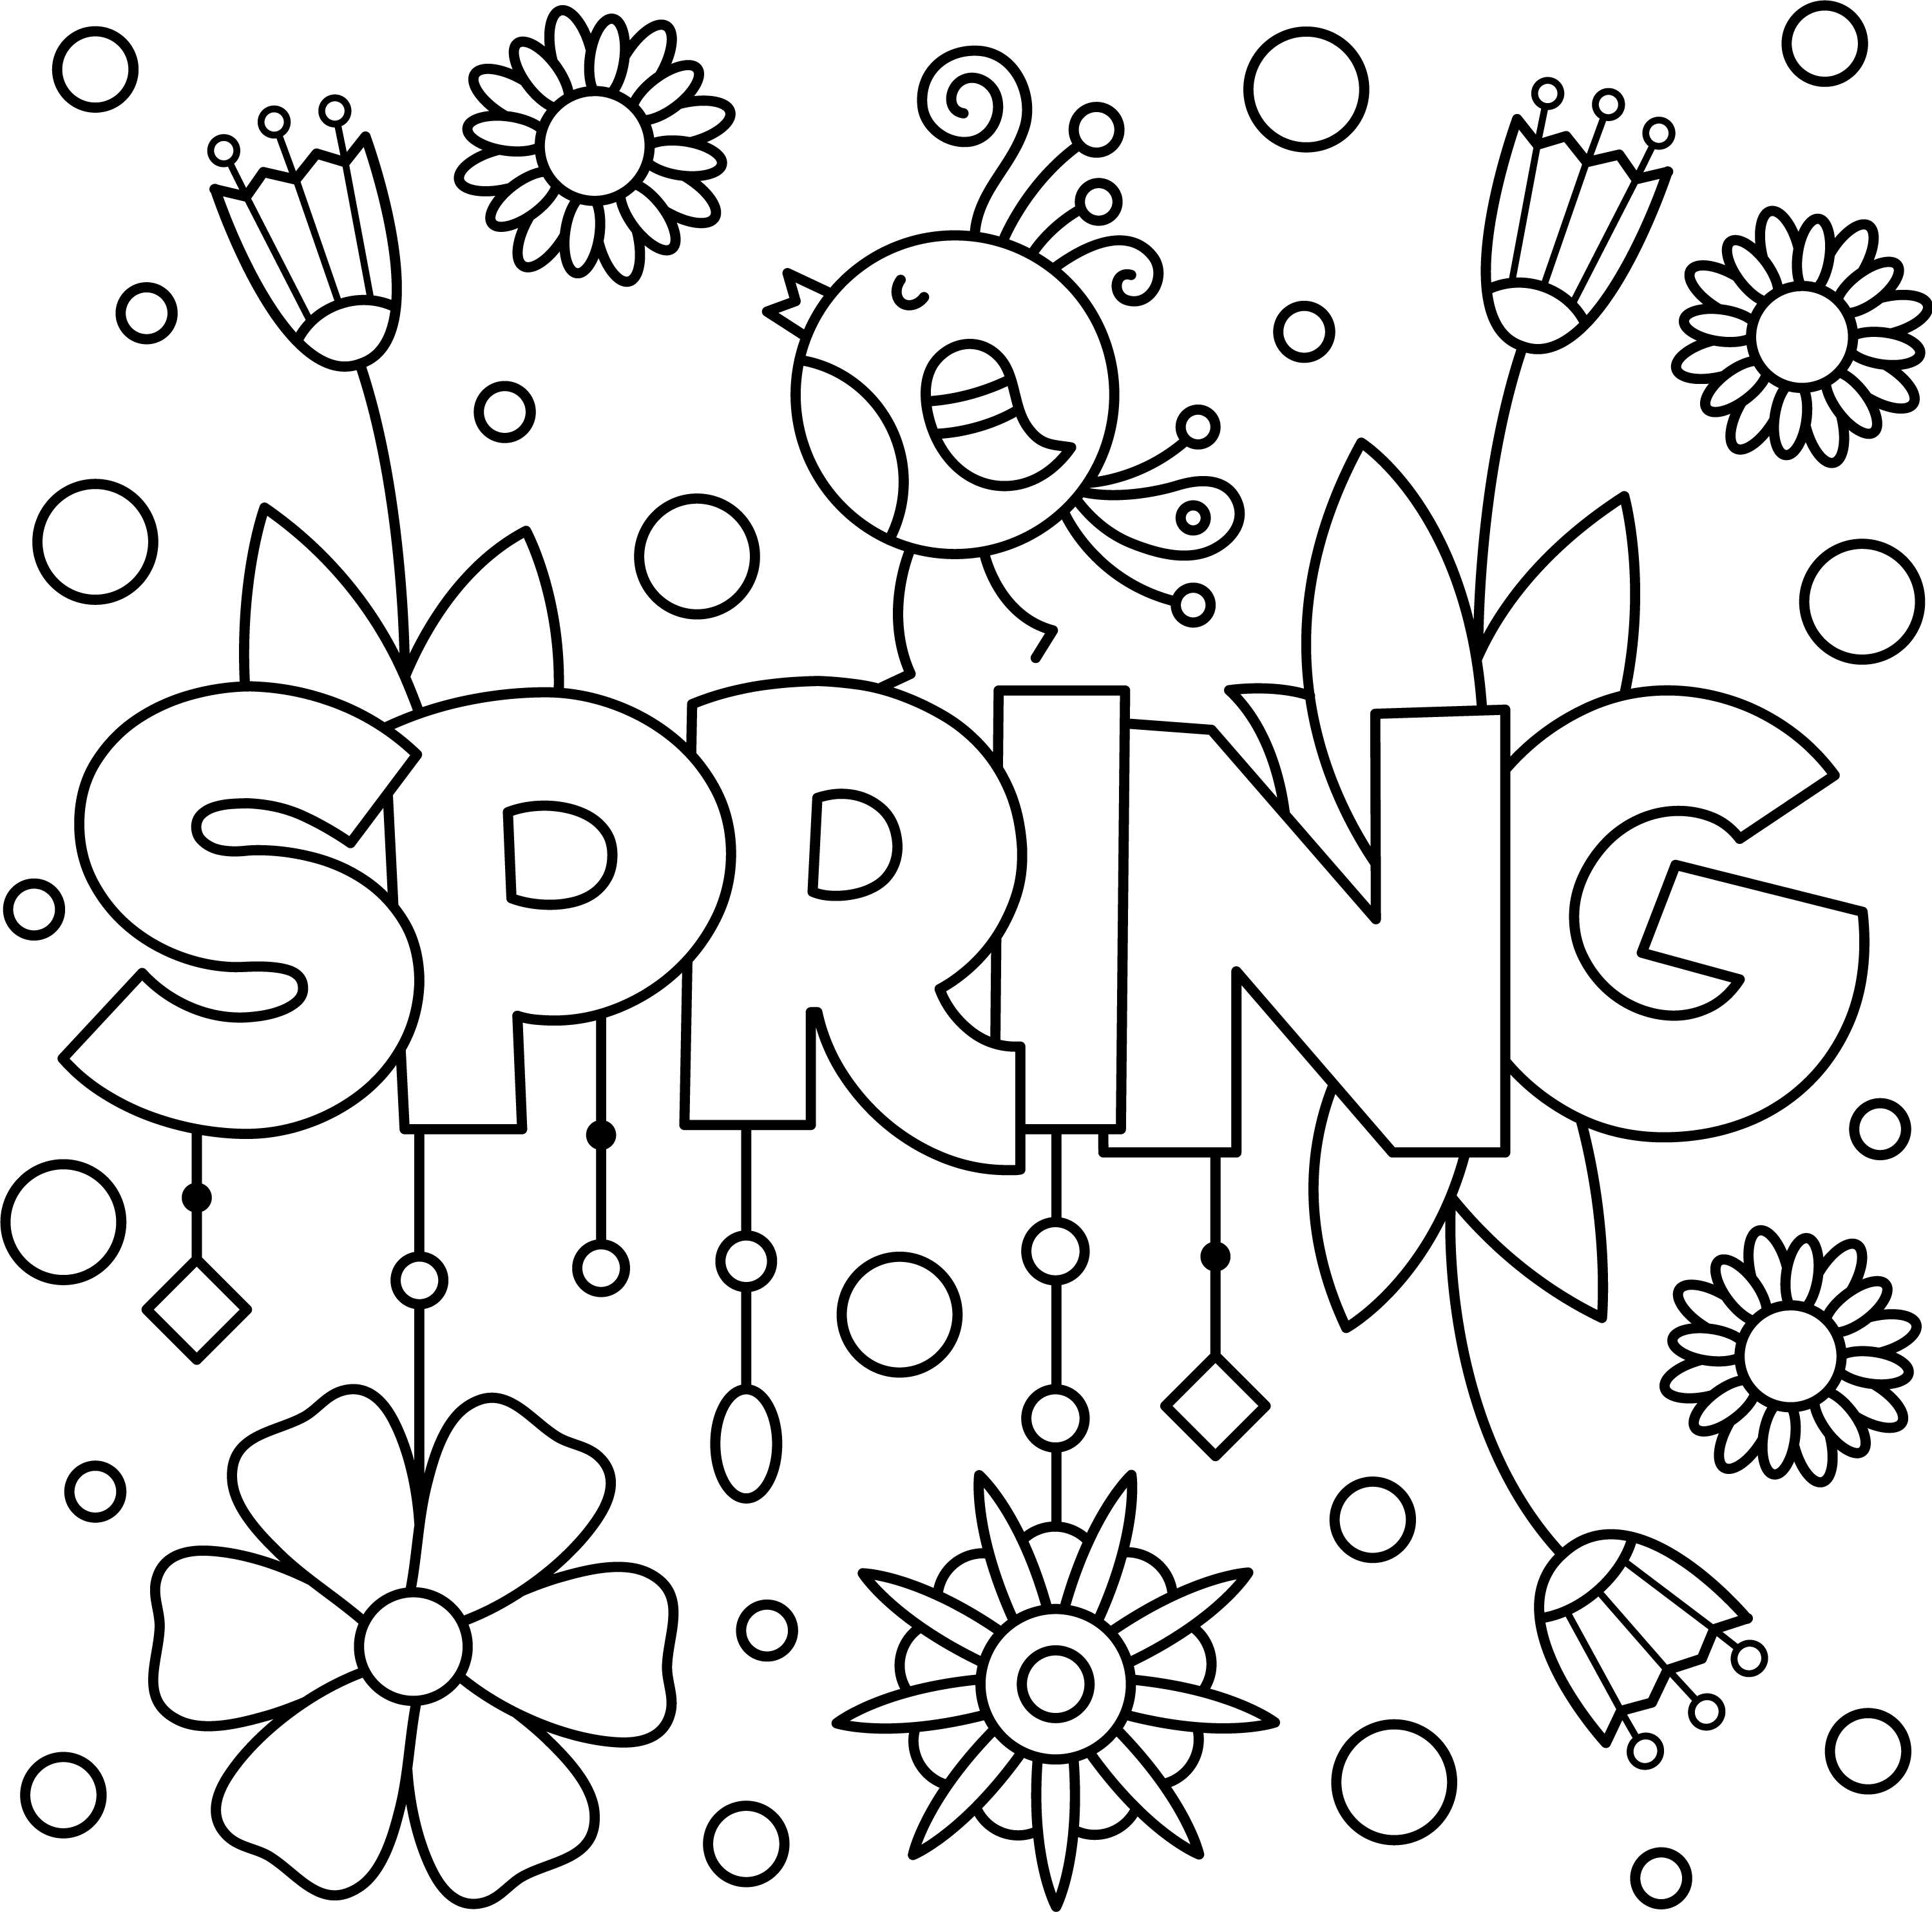 Fun spring colouring page printable â thrifty mommas tips